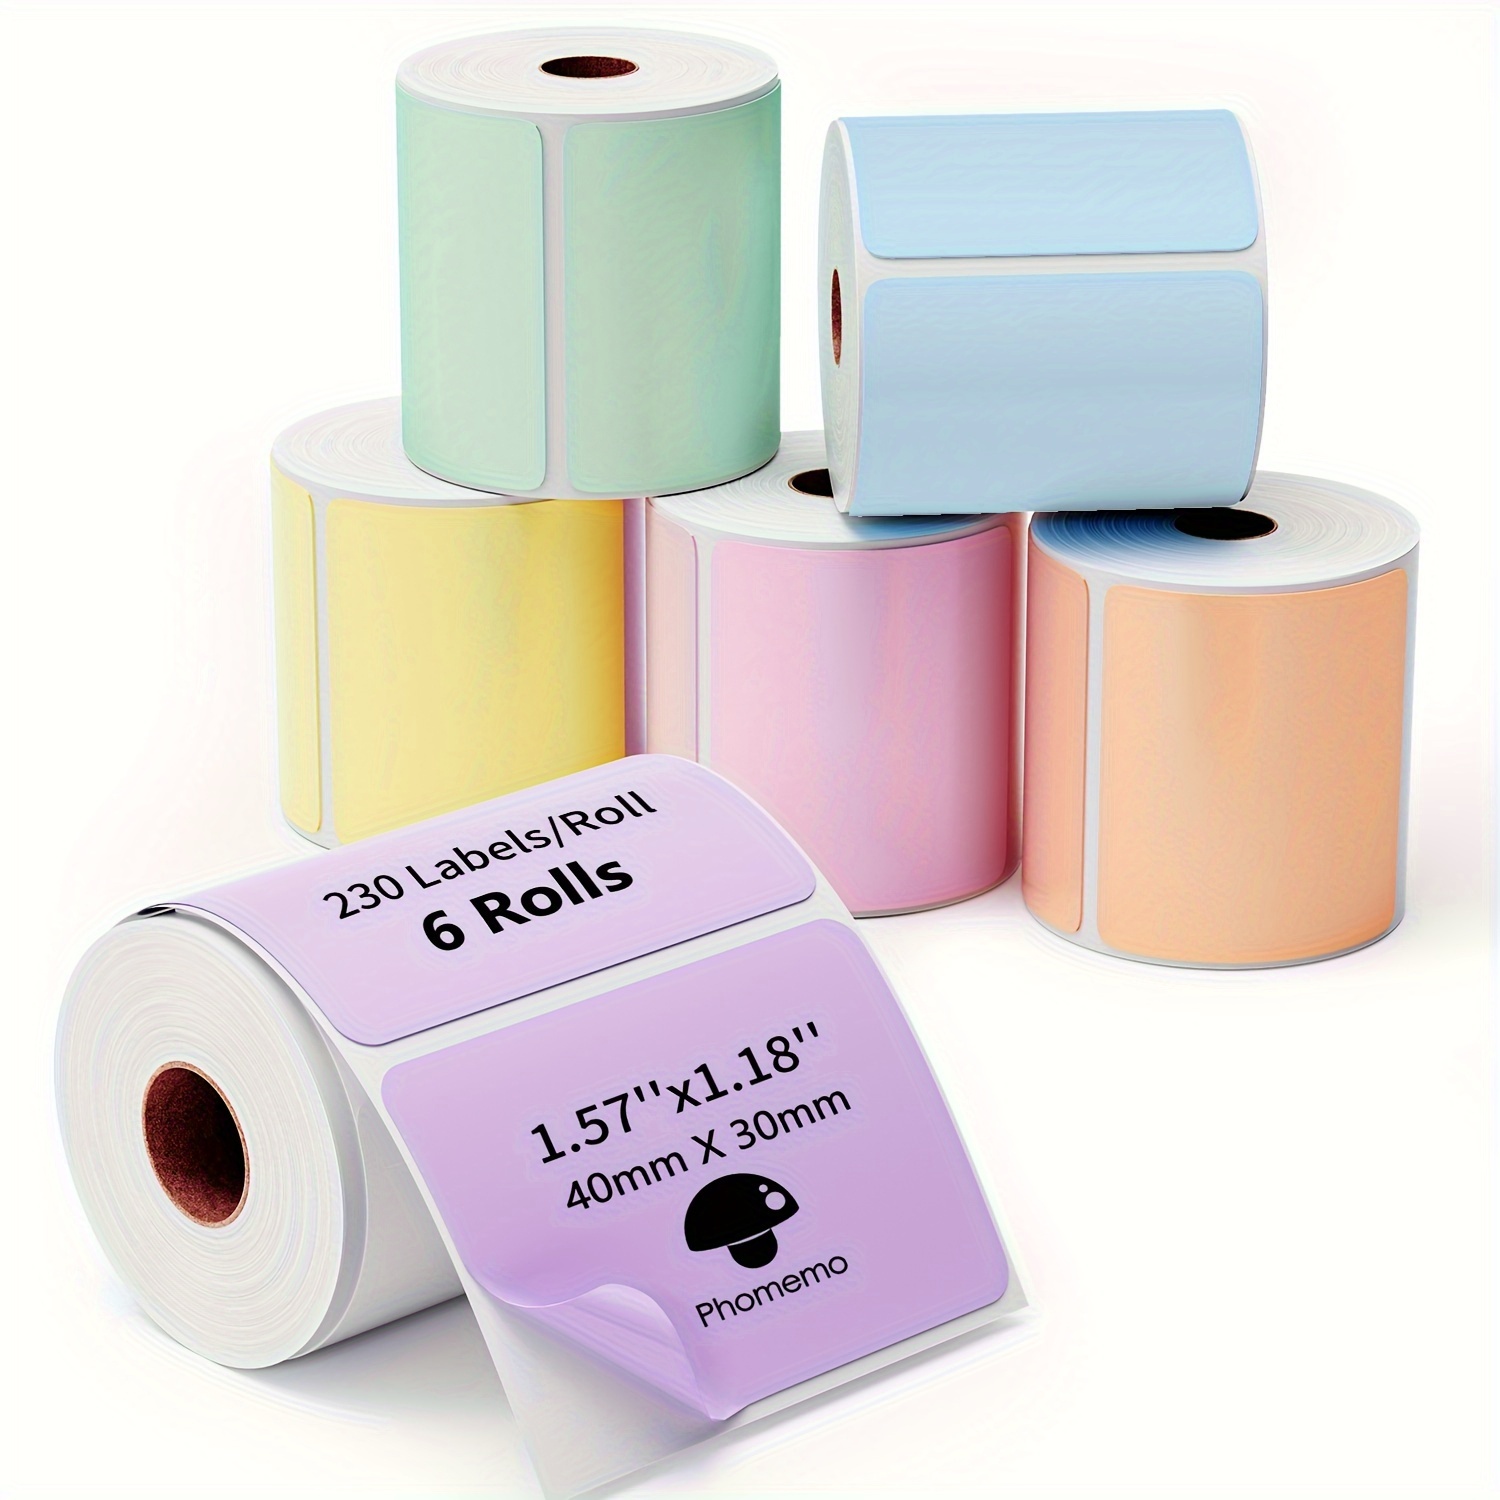 

Phomemo M110/m221/m220/m120/m200 Square Colorful Adhesive Labels 40x 30mm (1.57'' X 1.18''), 6 Rolls Of Thermal Label Paper, 230 Labels Per Roll (blue/pink/khaki/green/yellow/purple)